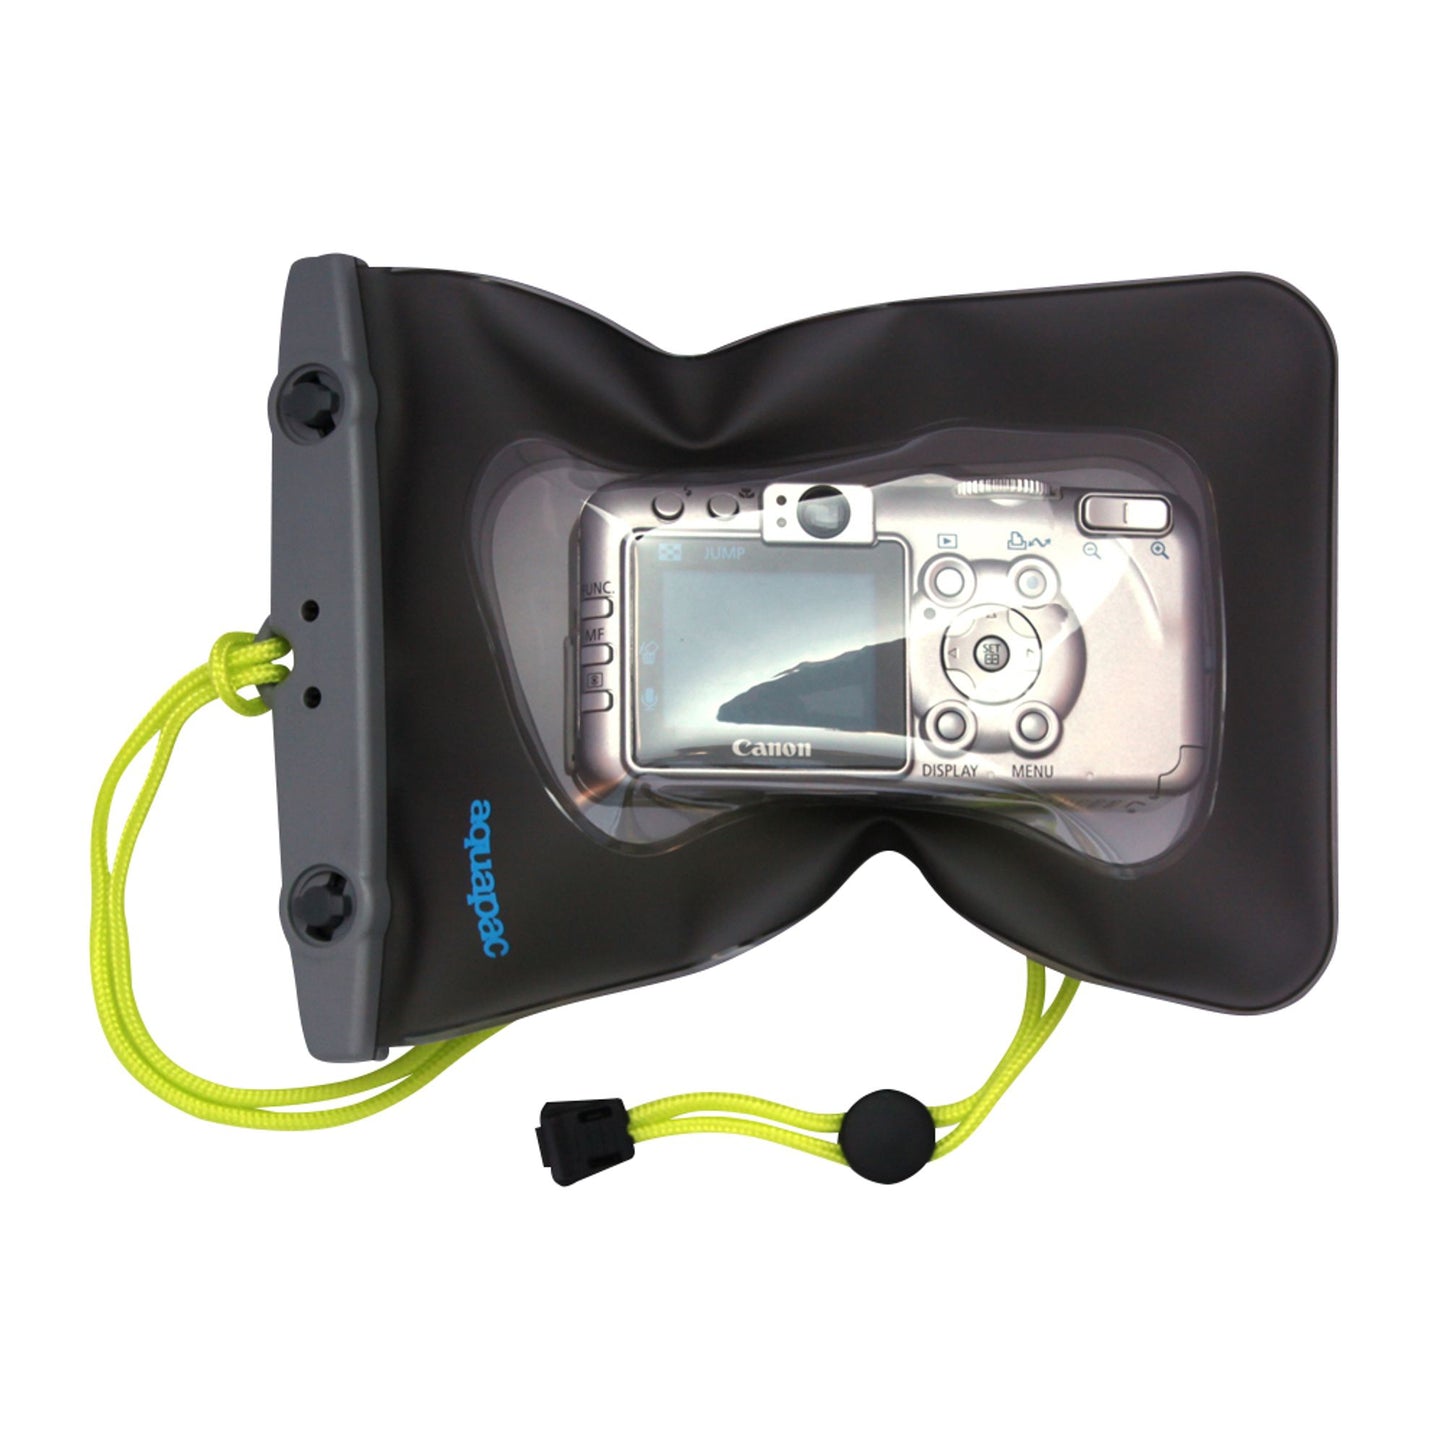 An Aquapac Waterproof Camera Case - Small 418 with a camera attached.